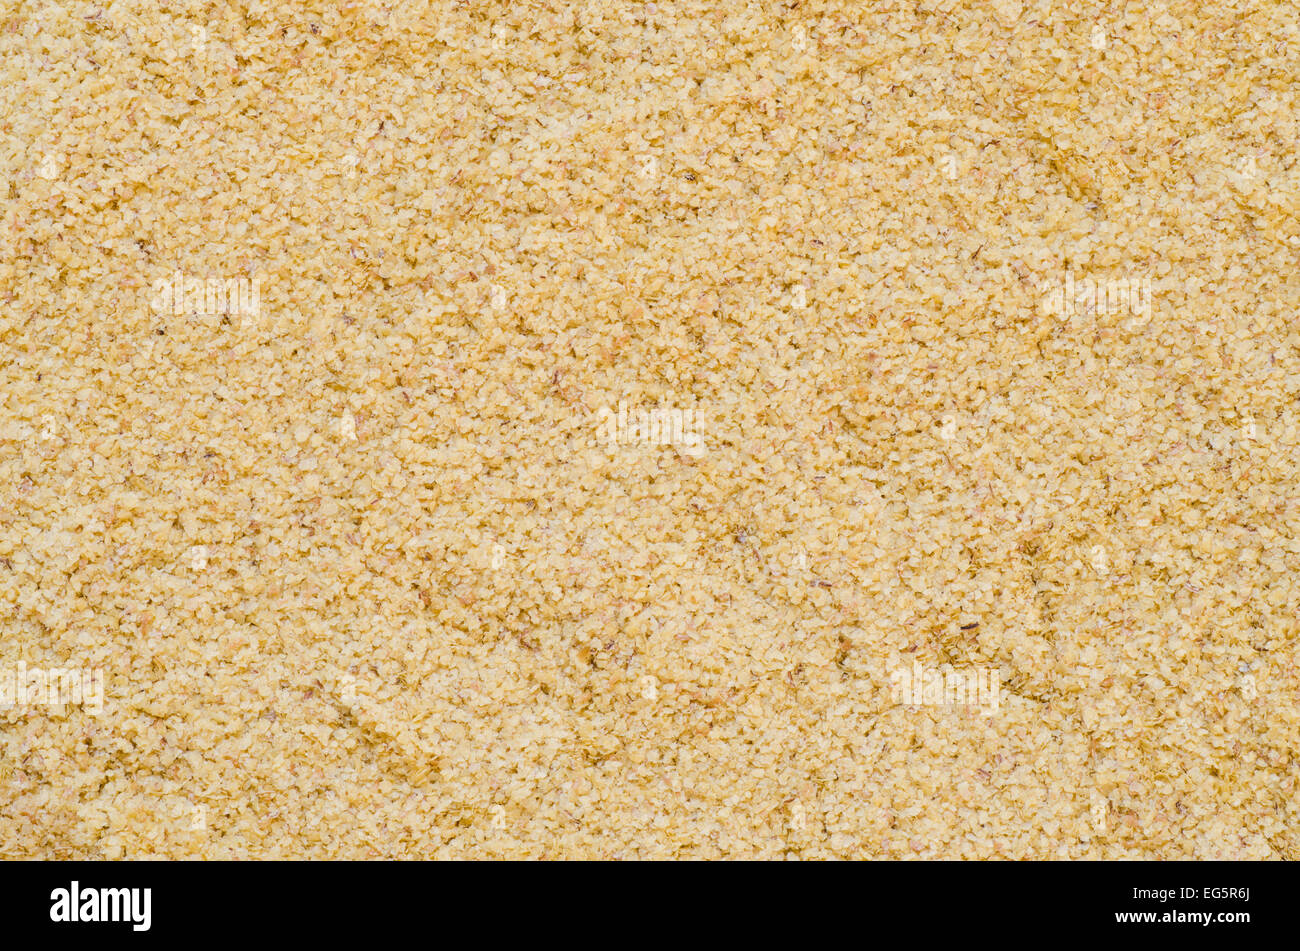 food background of wheat germ Stock Photo